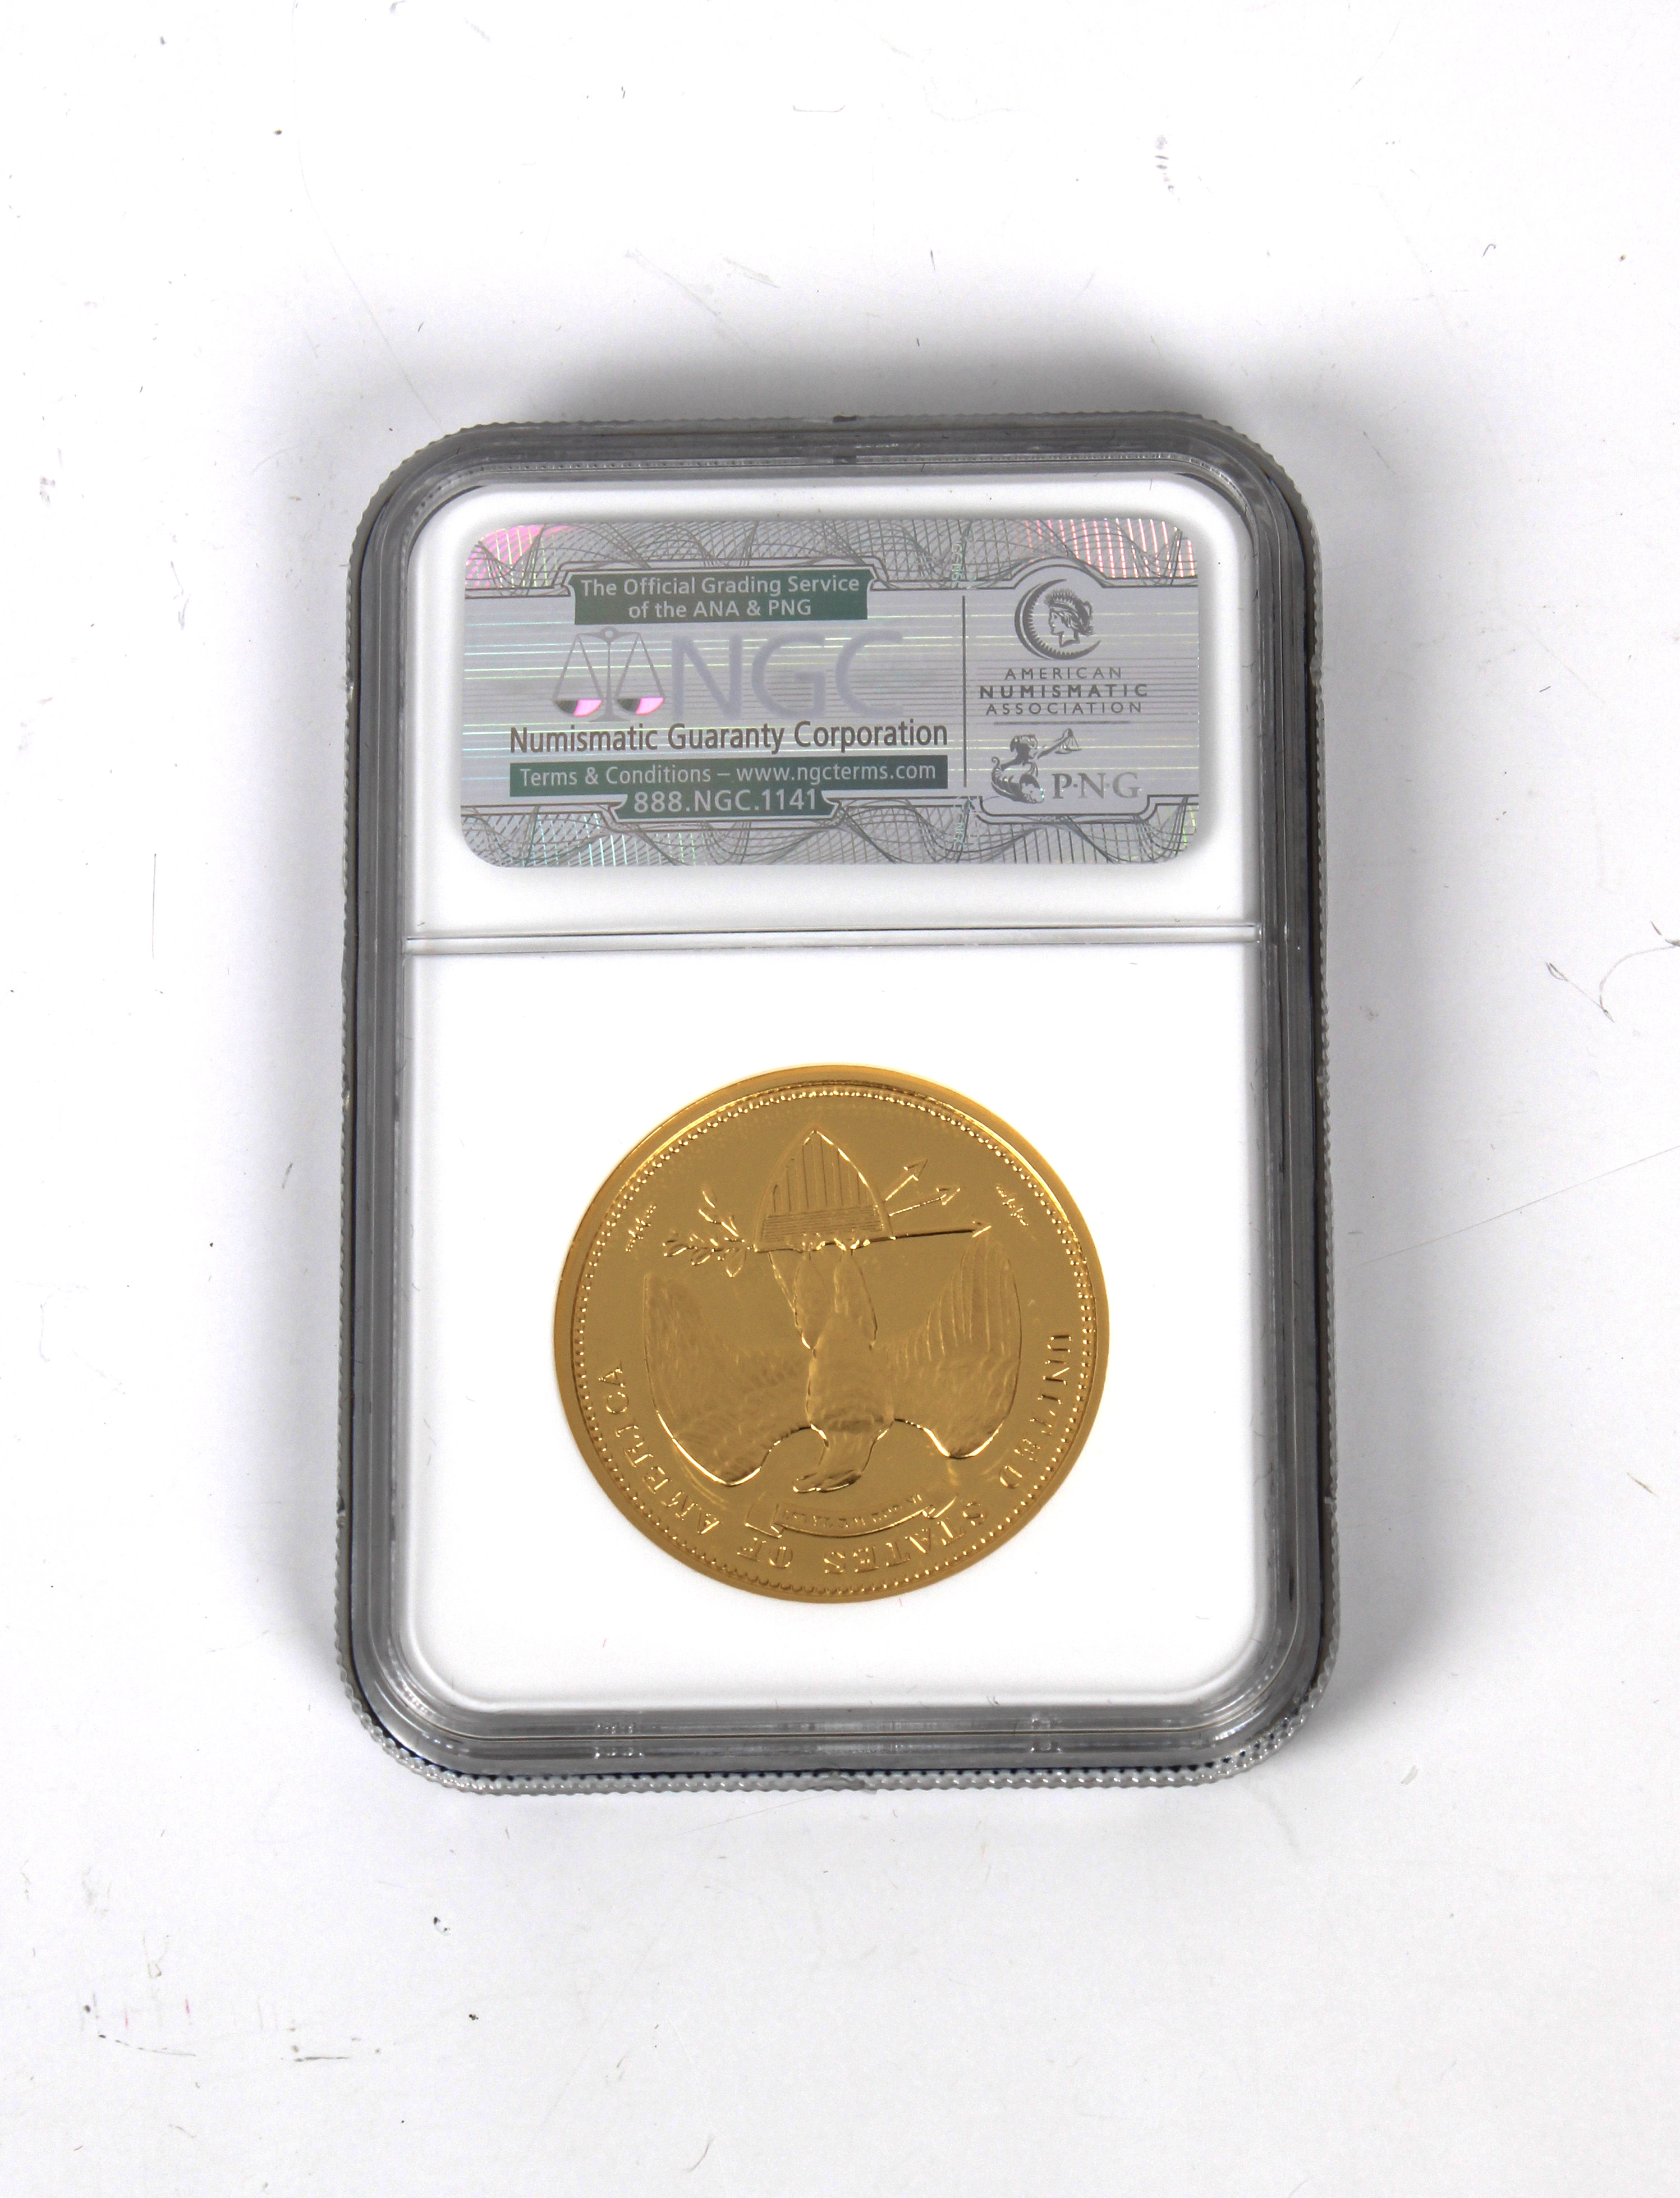 A very rare George T. Morgan $100 Gold Union 2010 Ultra Cameo Gem Proof coin - NGC capsulated - Image 3 of 3